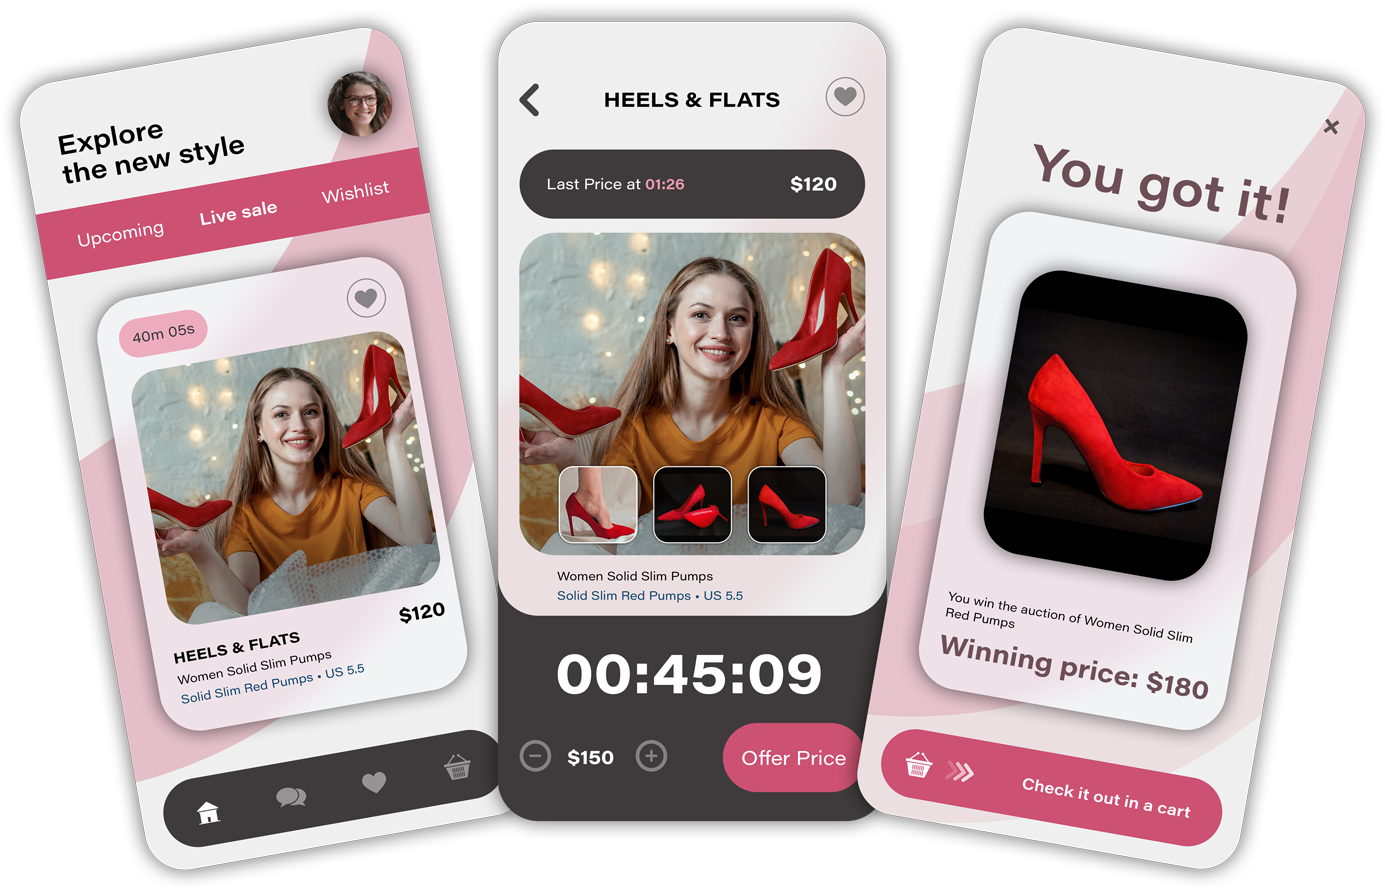 Seamlessly blend live video and chat into time-based offers